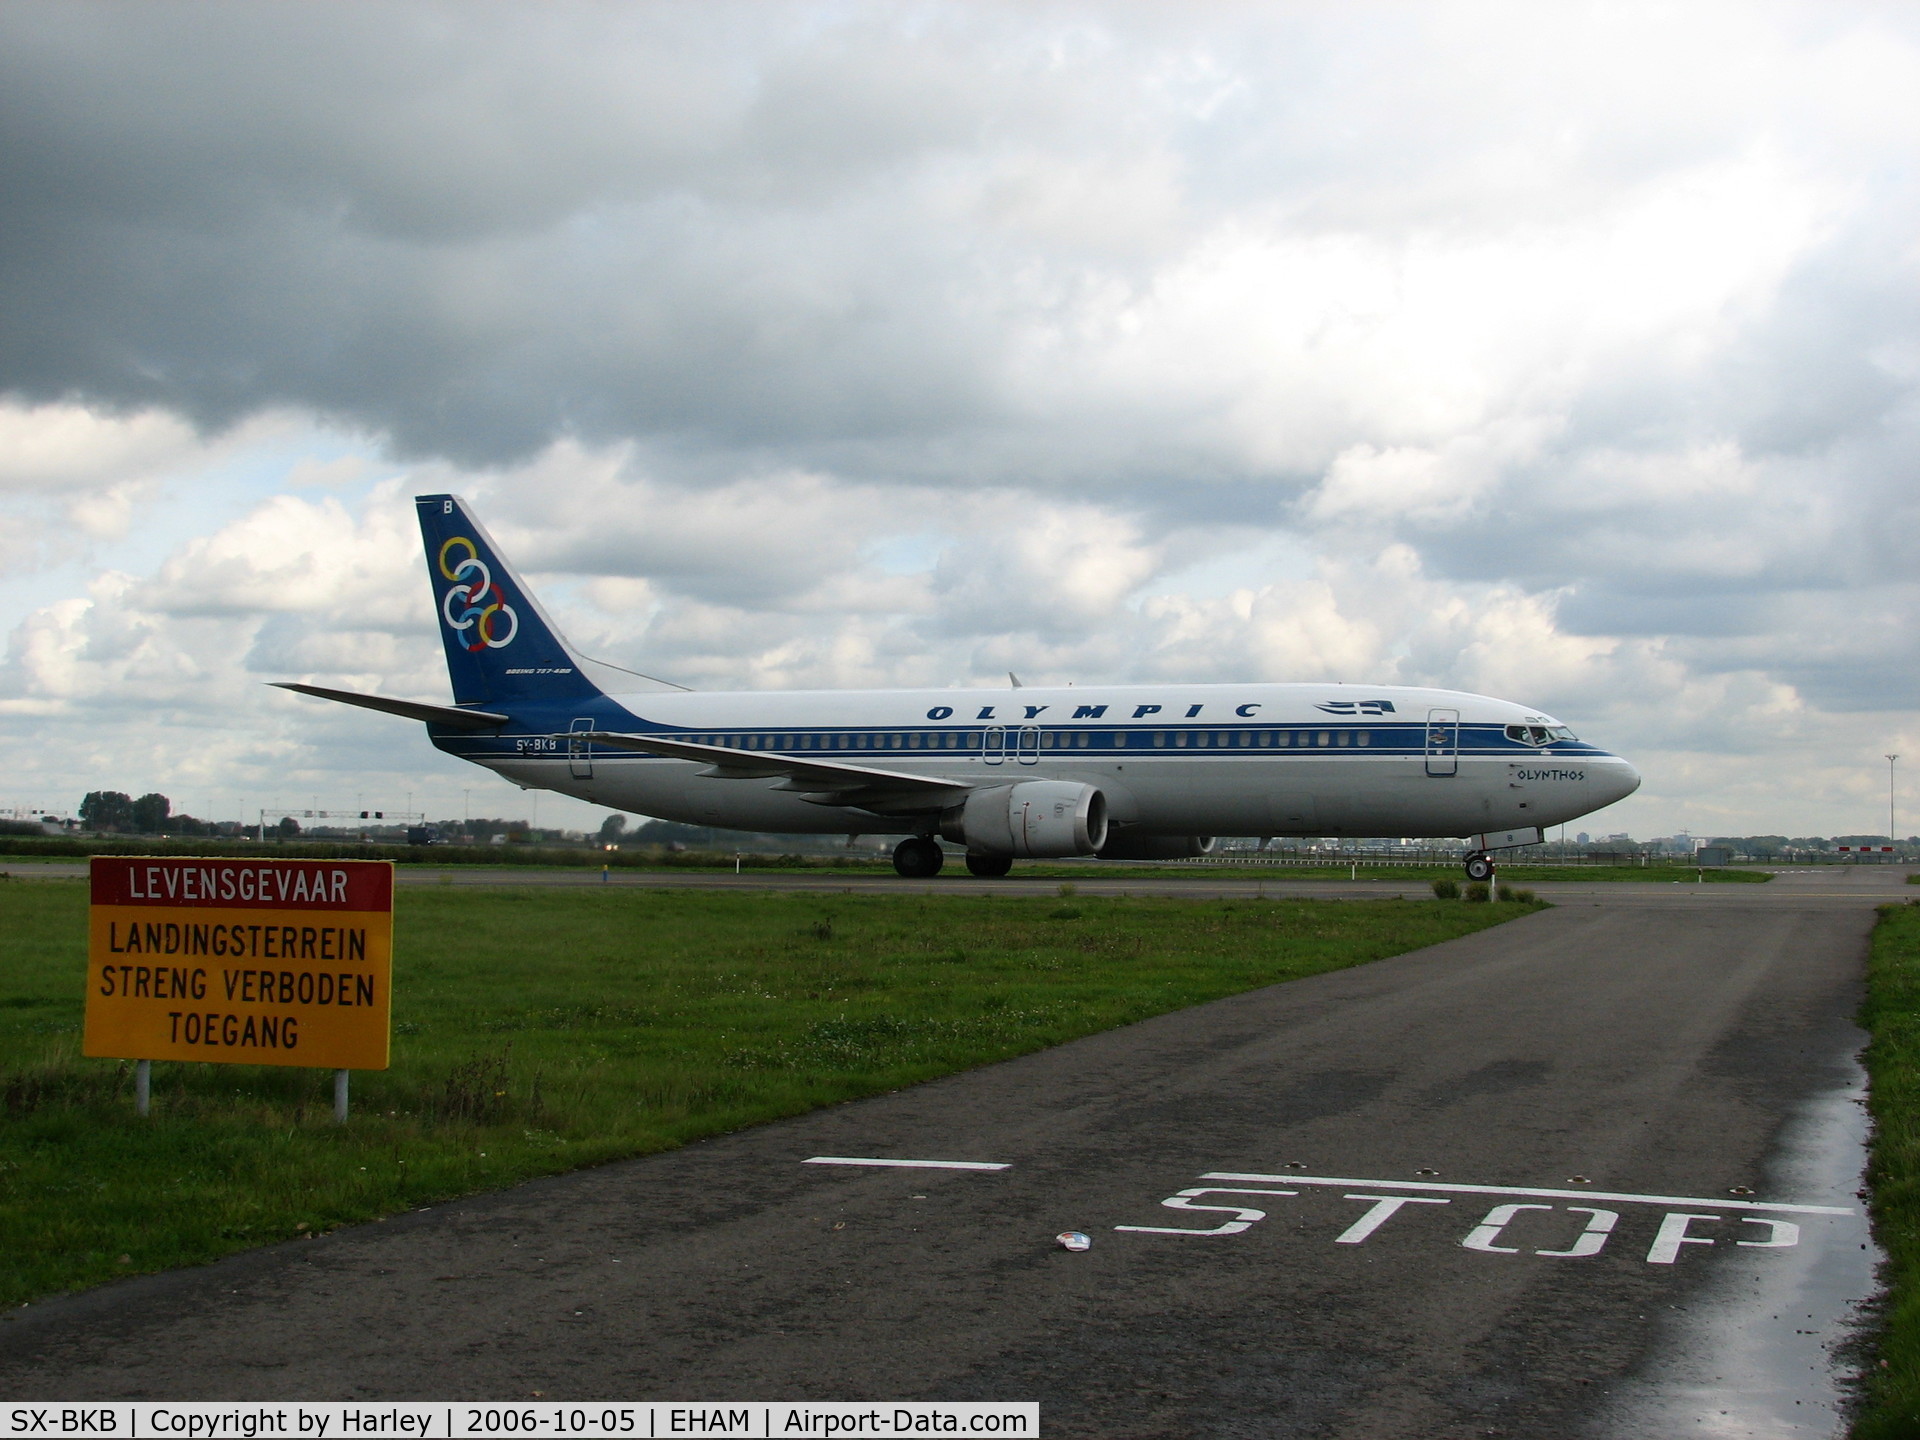 SX-BKB, 1991 Boeing 737-484 C/N 25314/2124, taxiing in Amsterdam coming from RWY18R